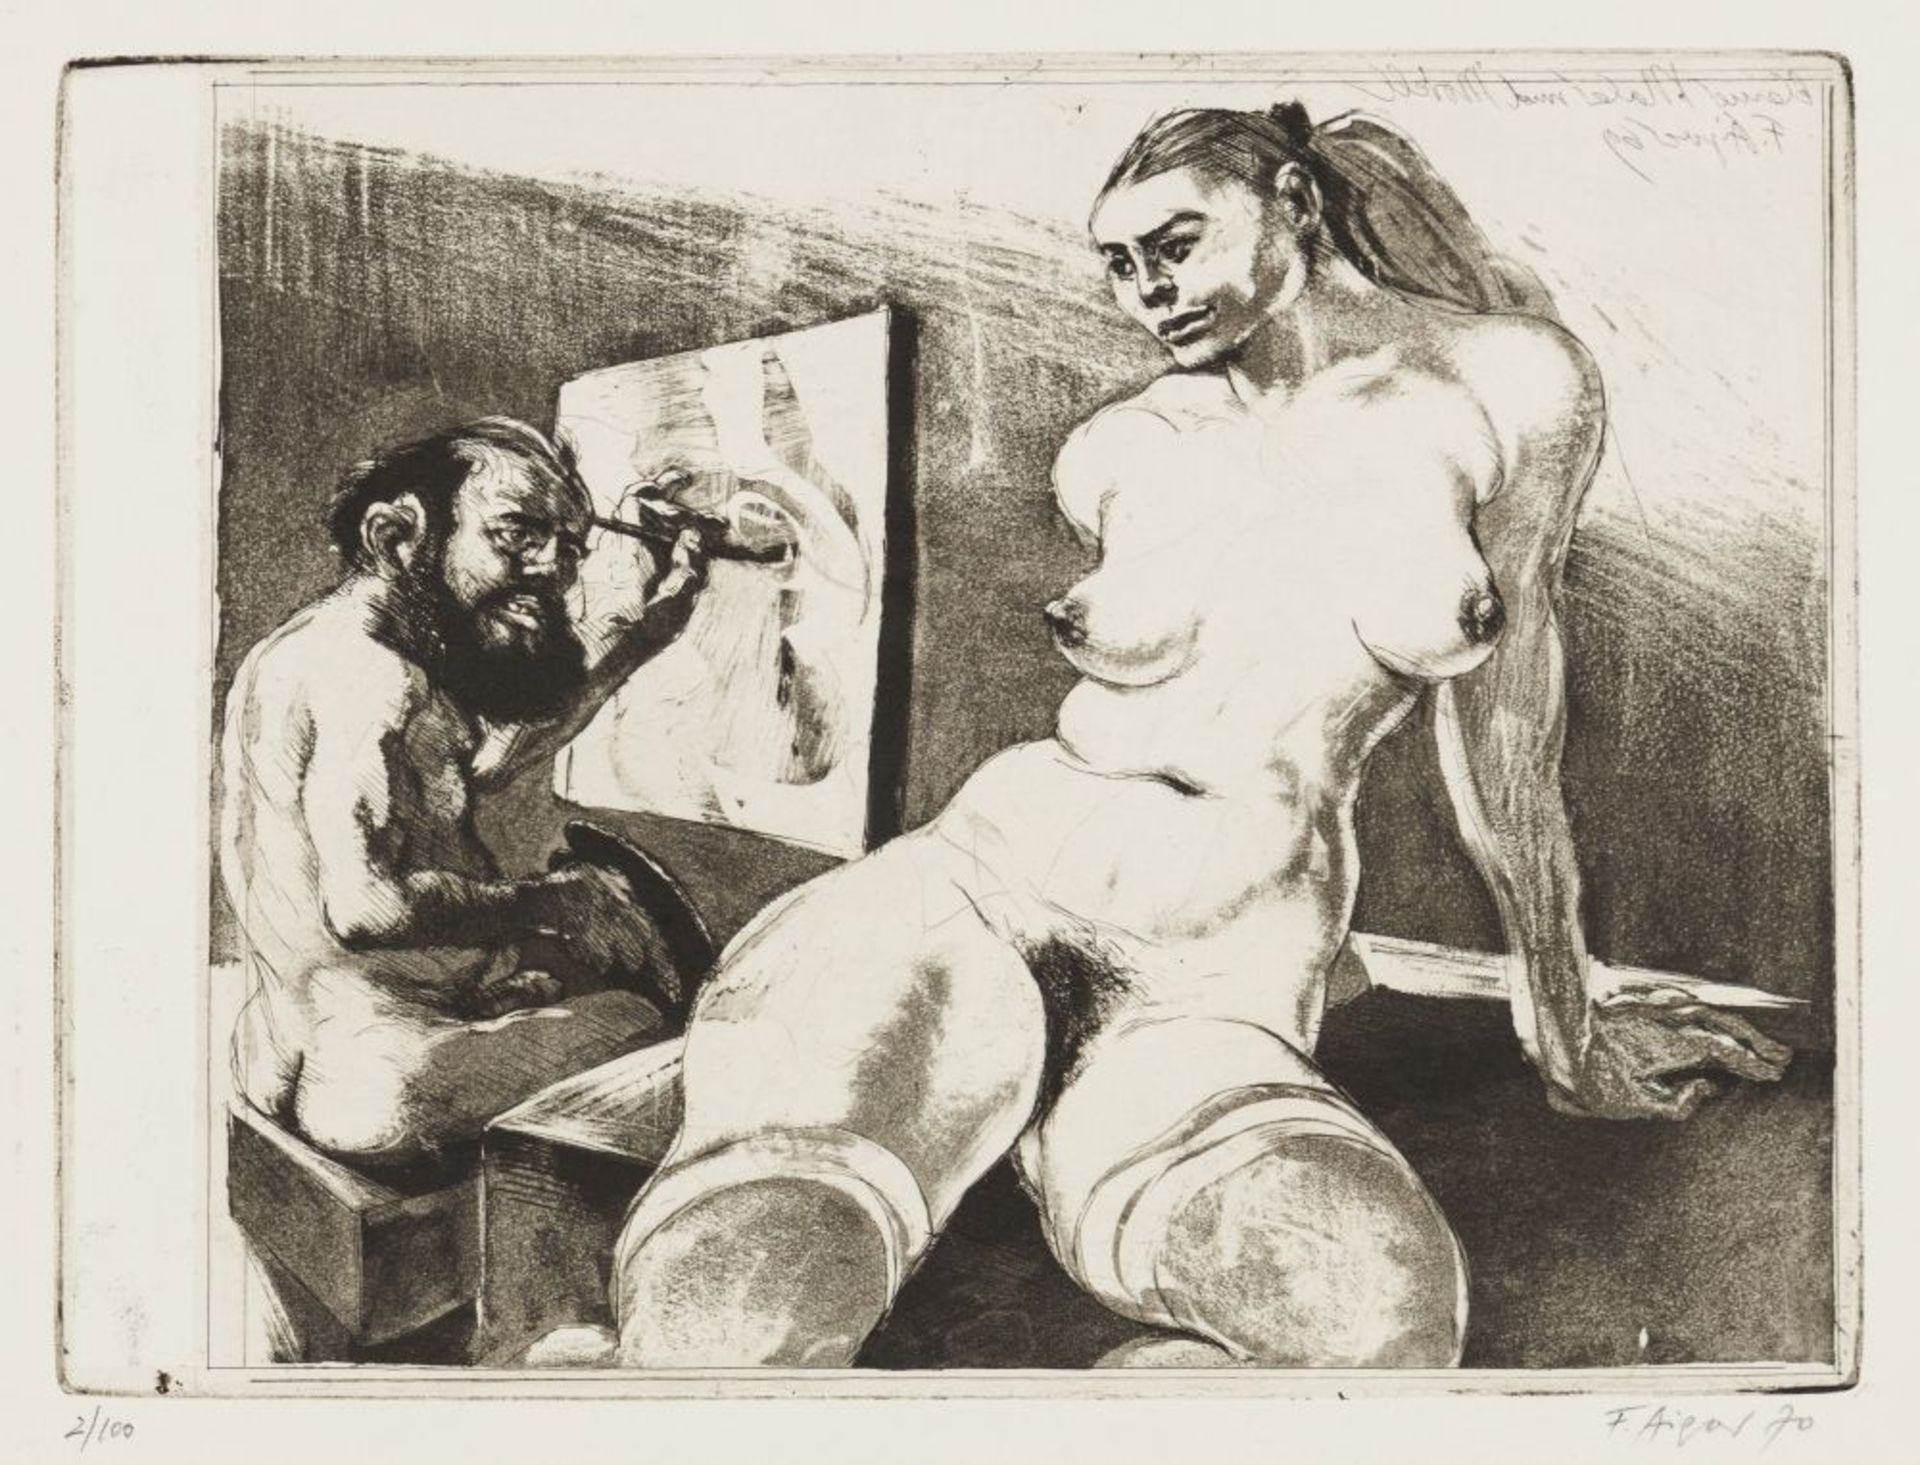 Little Painter and Model from the Beauty and Beast series, 1970 Aquatint etching Signed and dated